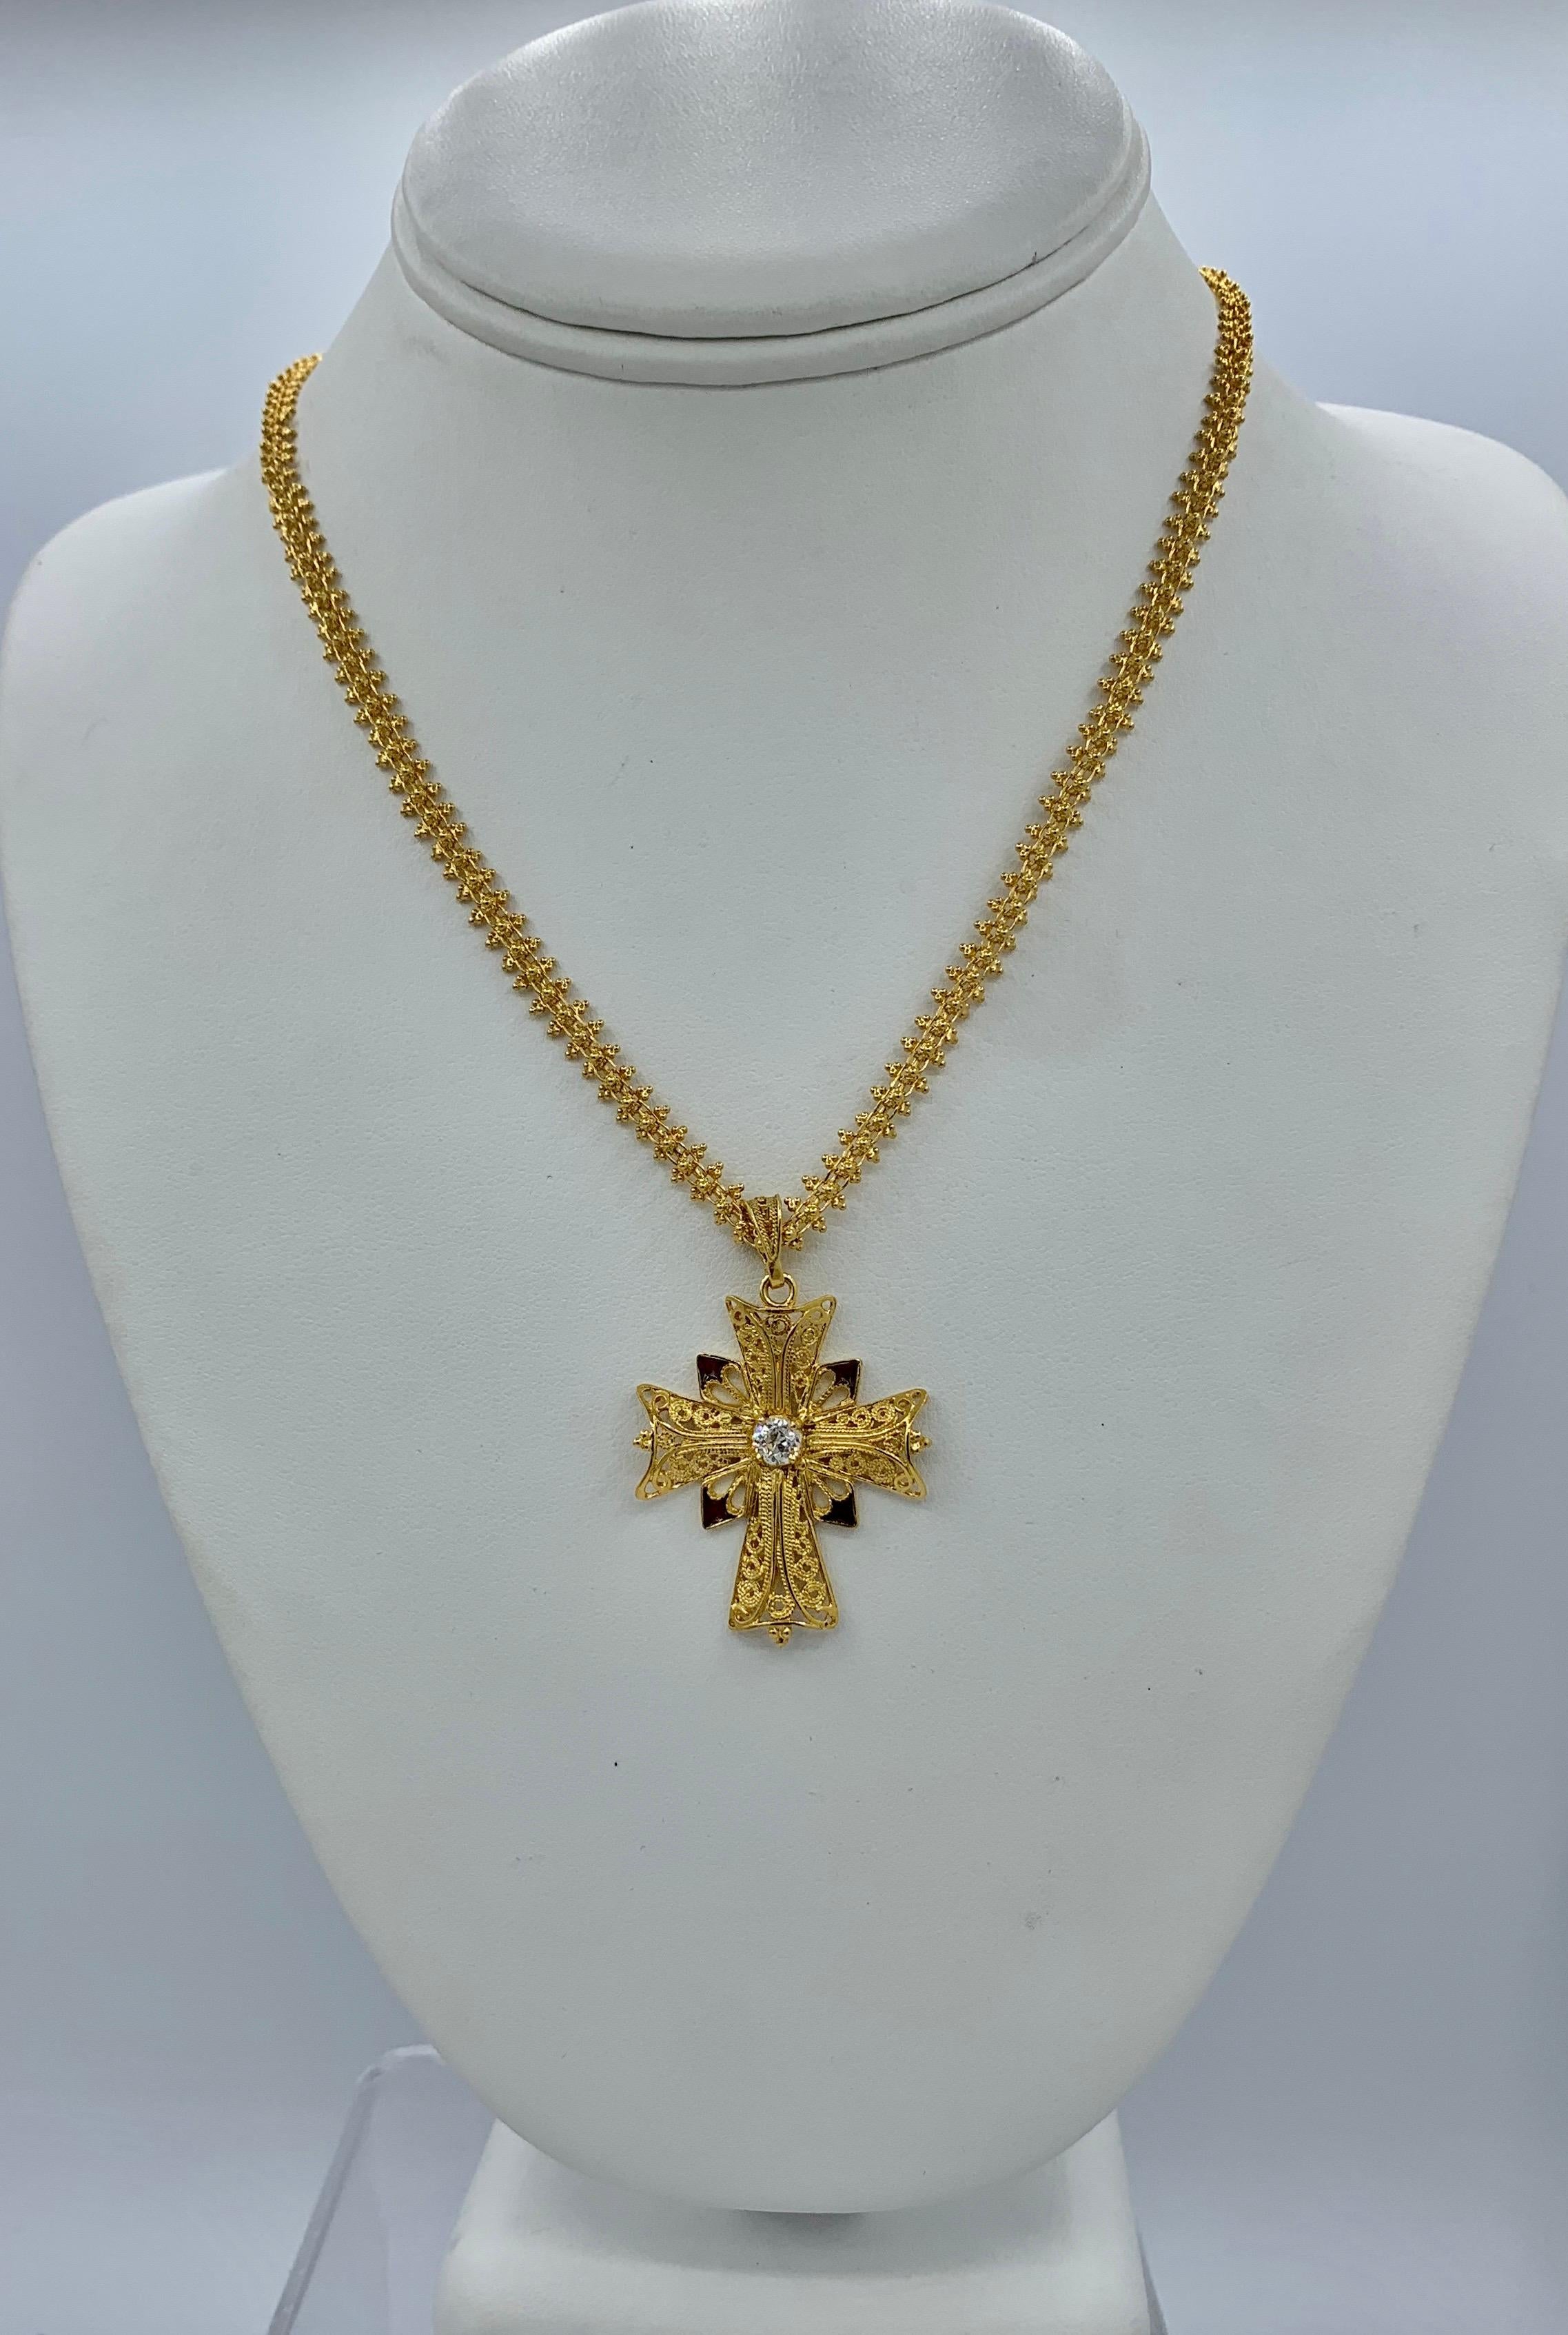 Old Mine Diamond 18 Karat Gold Enamel Cross Necklace Tourmaline Clasp In Excellent Condition For Sale In New York, NY